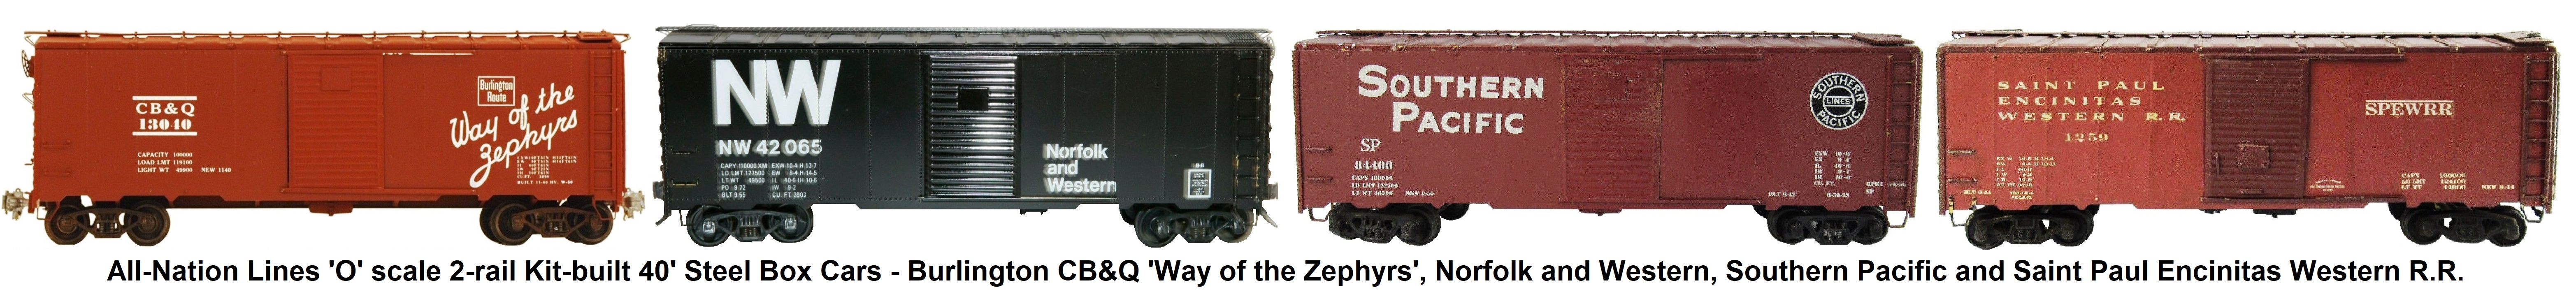 All-Nation 'O' scale 40' Steel Kit-built Box Cars - #3625 Burlington CB&Q 'Way of the Zephyrs', Norfolk and Western, Southern Pacific, and Saint Paul Encinitas Western R.R. 